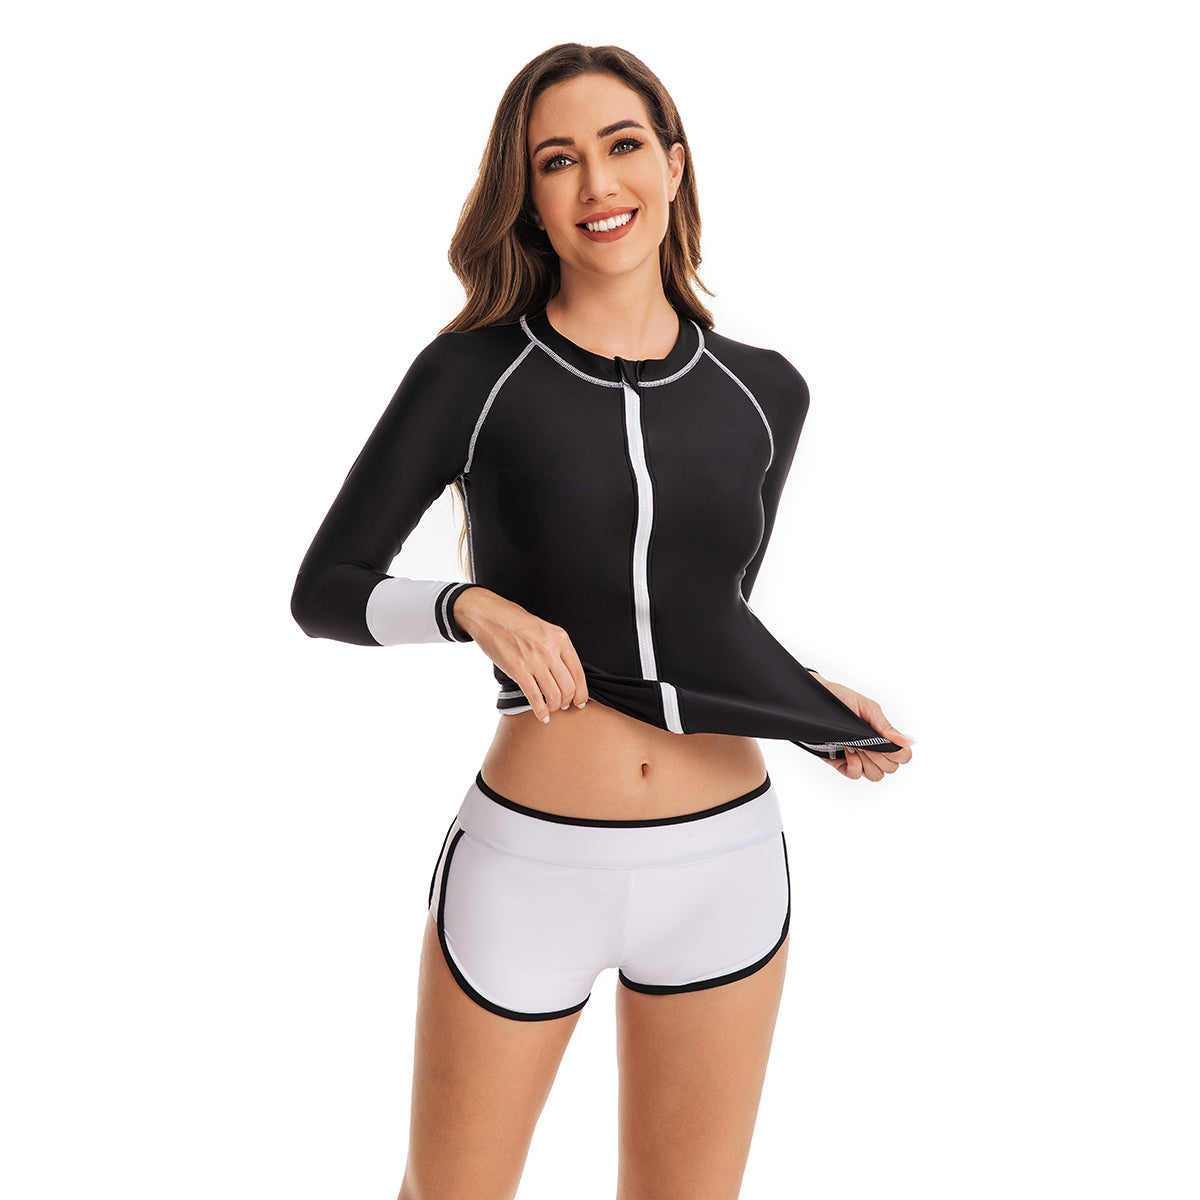 2 Piece Long Sleeve Swimsuits for Women